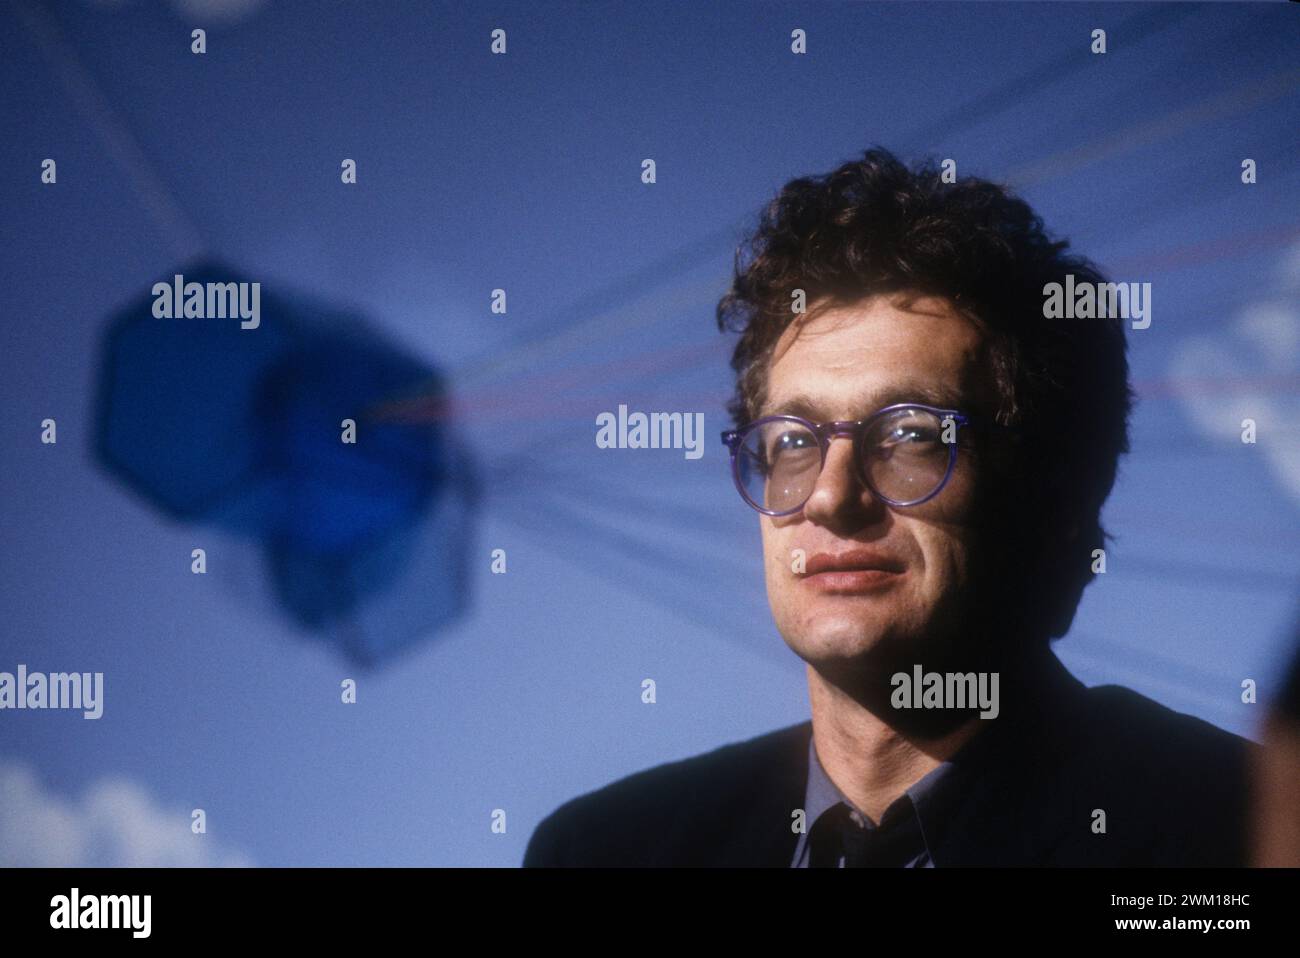 3833086 Wim Wenders; (add.info.: Rome, about 1990. German director Wim Wenders / Roma, 1990 circa. Il regista Wim Wenders); © Marcello Mencarini. All rights reserved 2024. Stock Photo